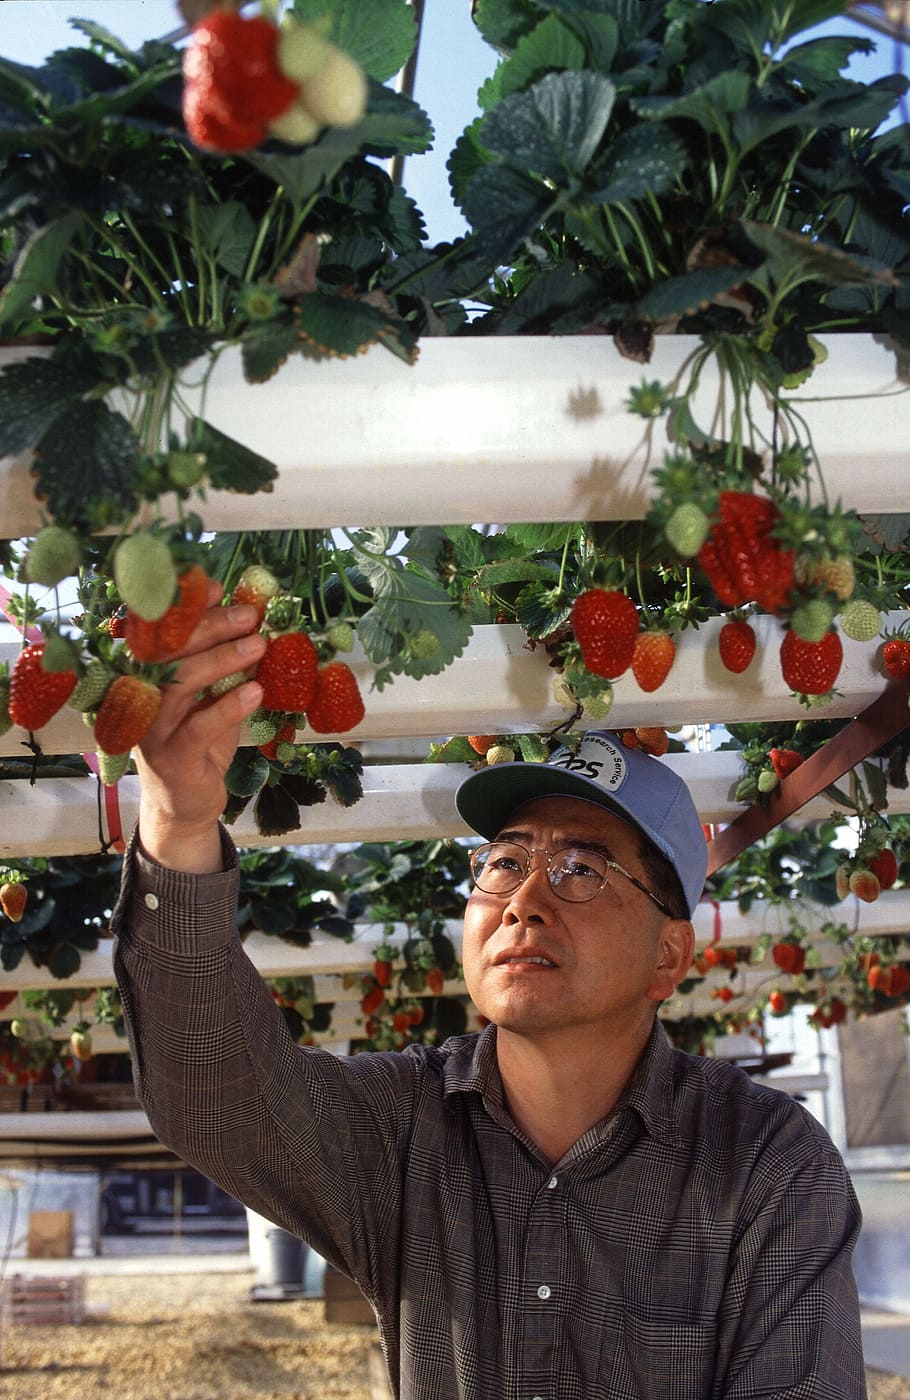 hydroponic, strawberries, growing, produce, farming, agriculture, farmer, freshness, crop, real people